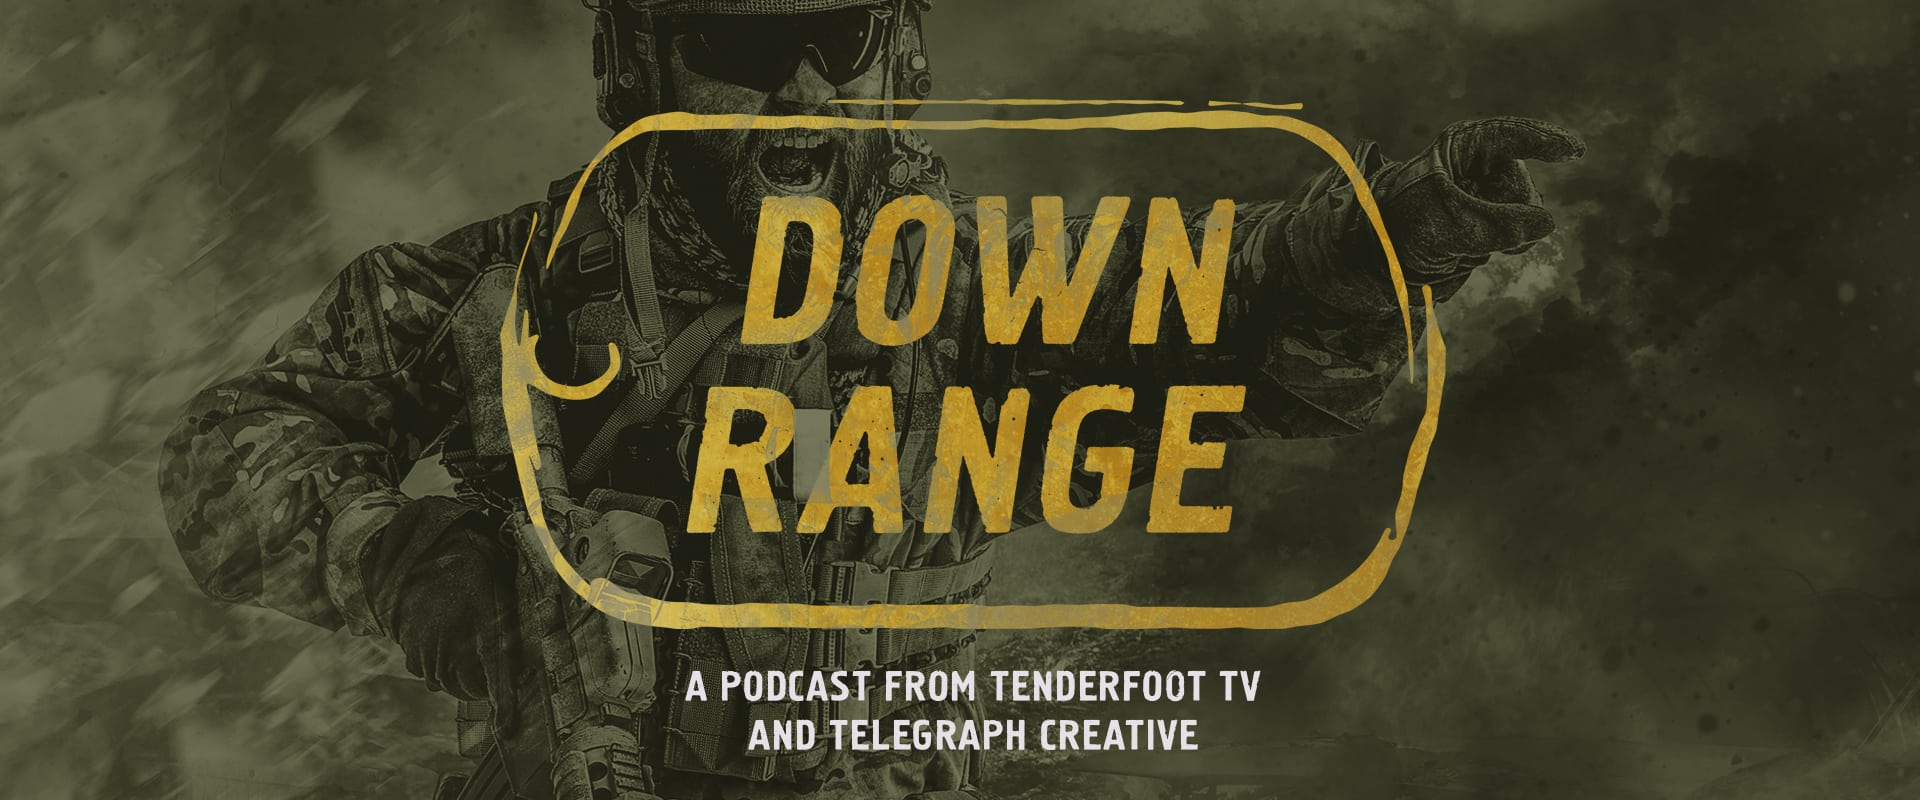 Telegraph Creative teams up with Podcast Juggernaut Tenderfoot TV to produce “Down Range”